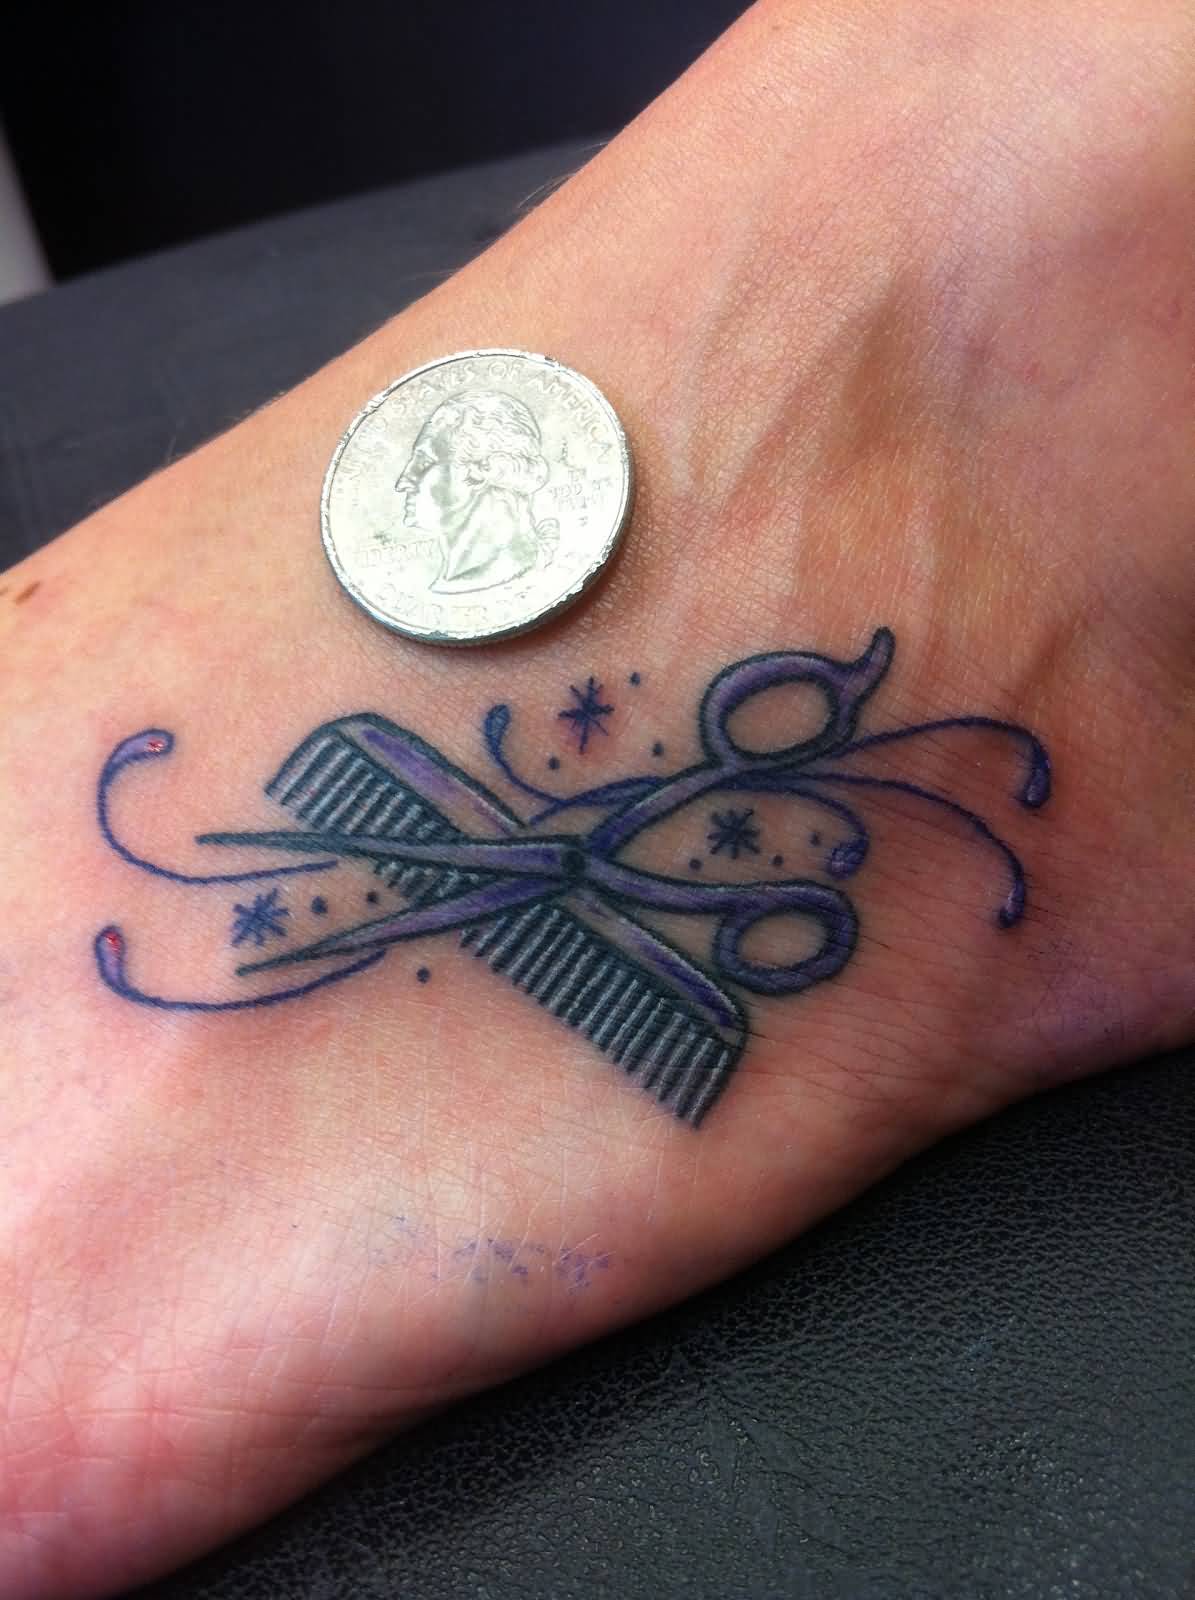 Hair Comb And Scissor With Tiny Stars Tattoo On Foot